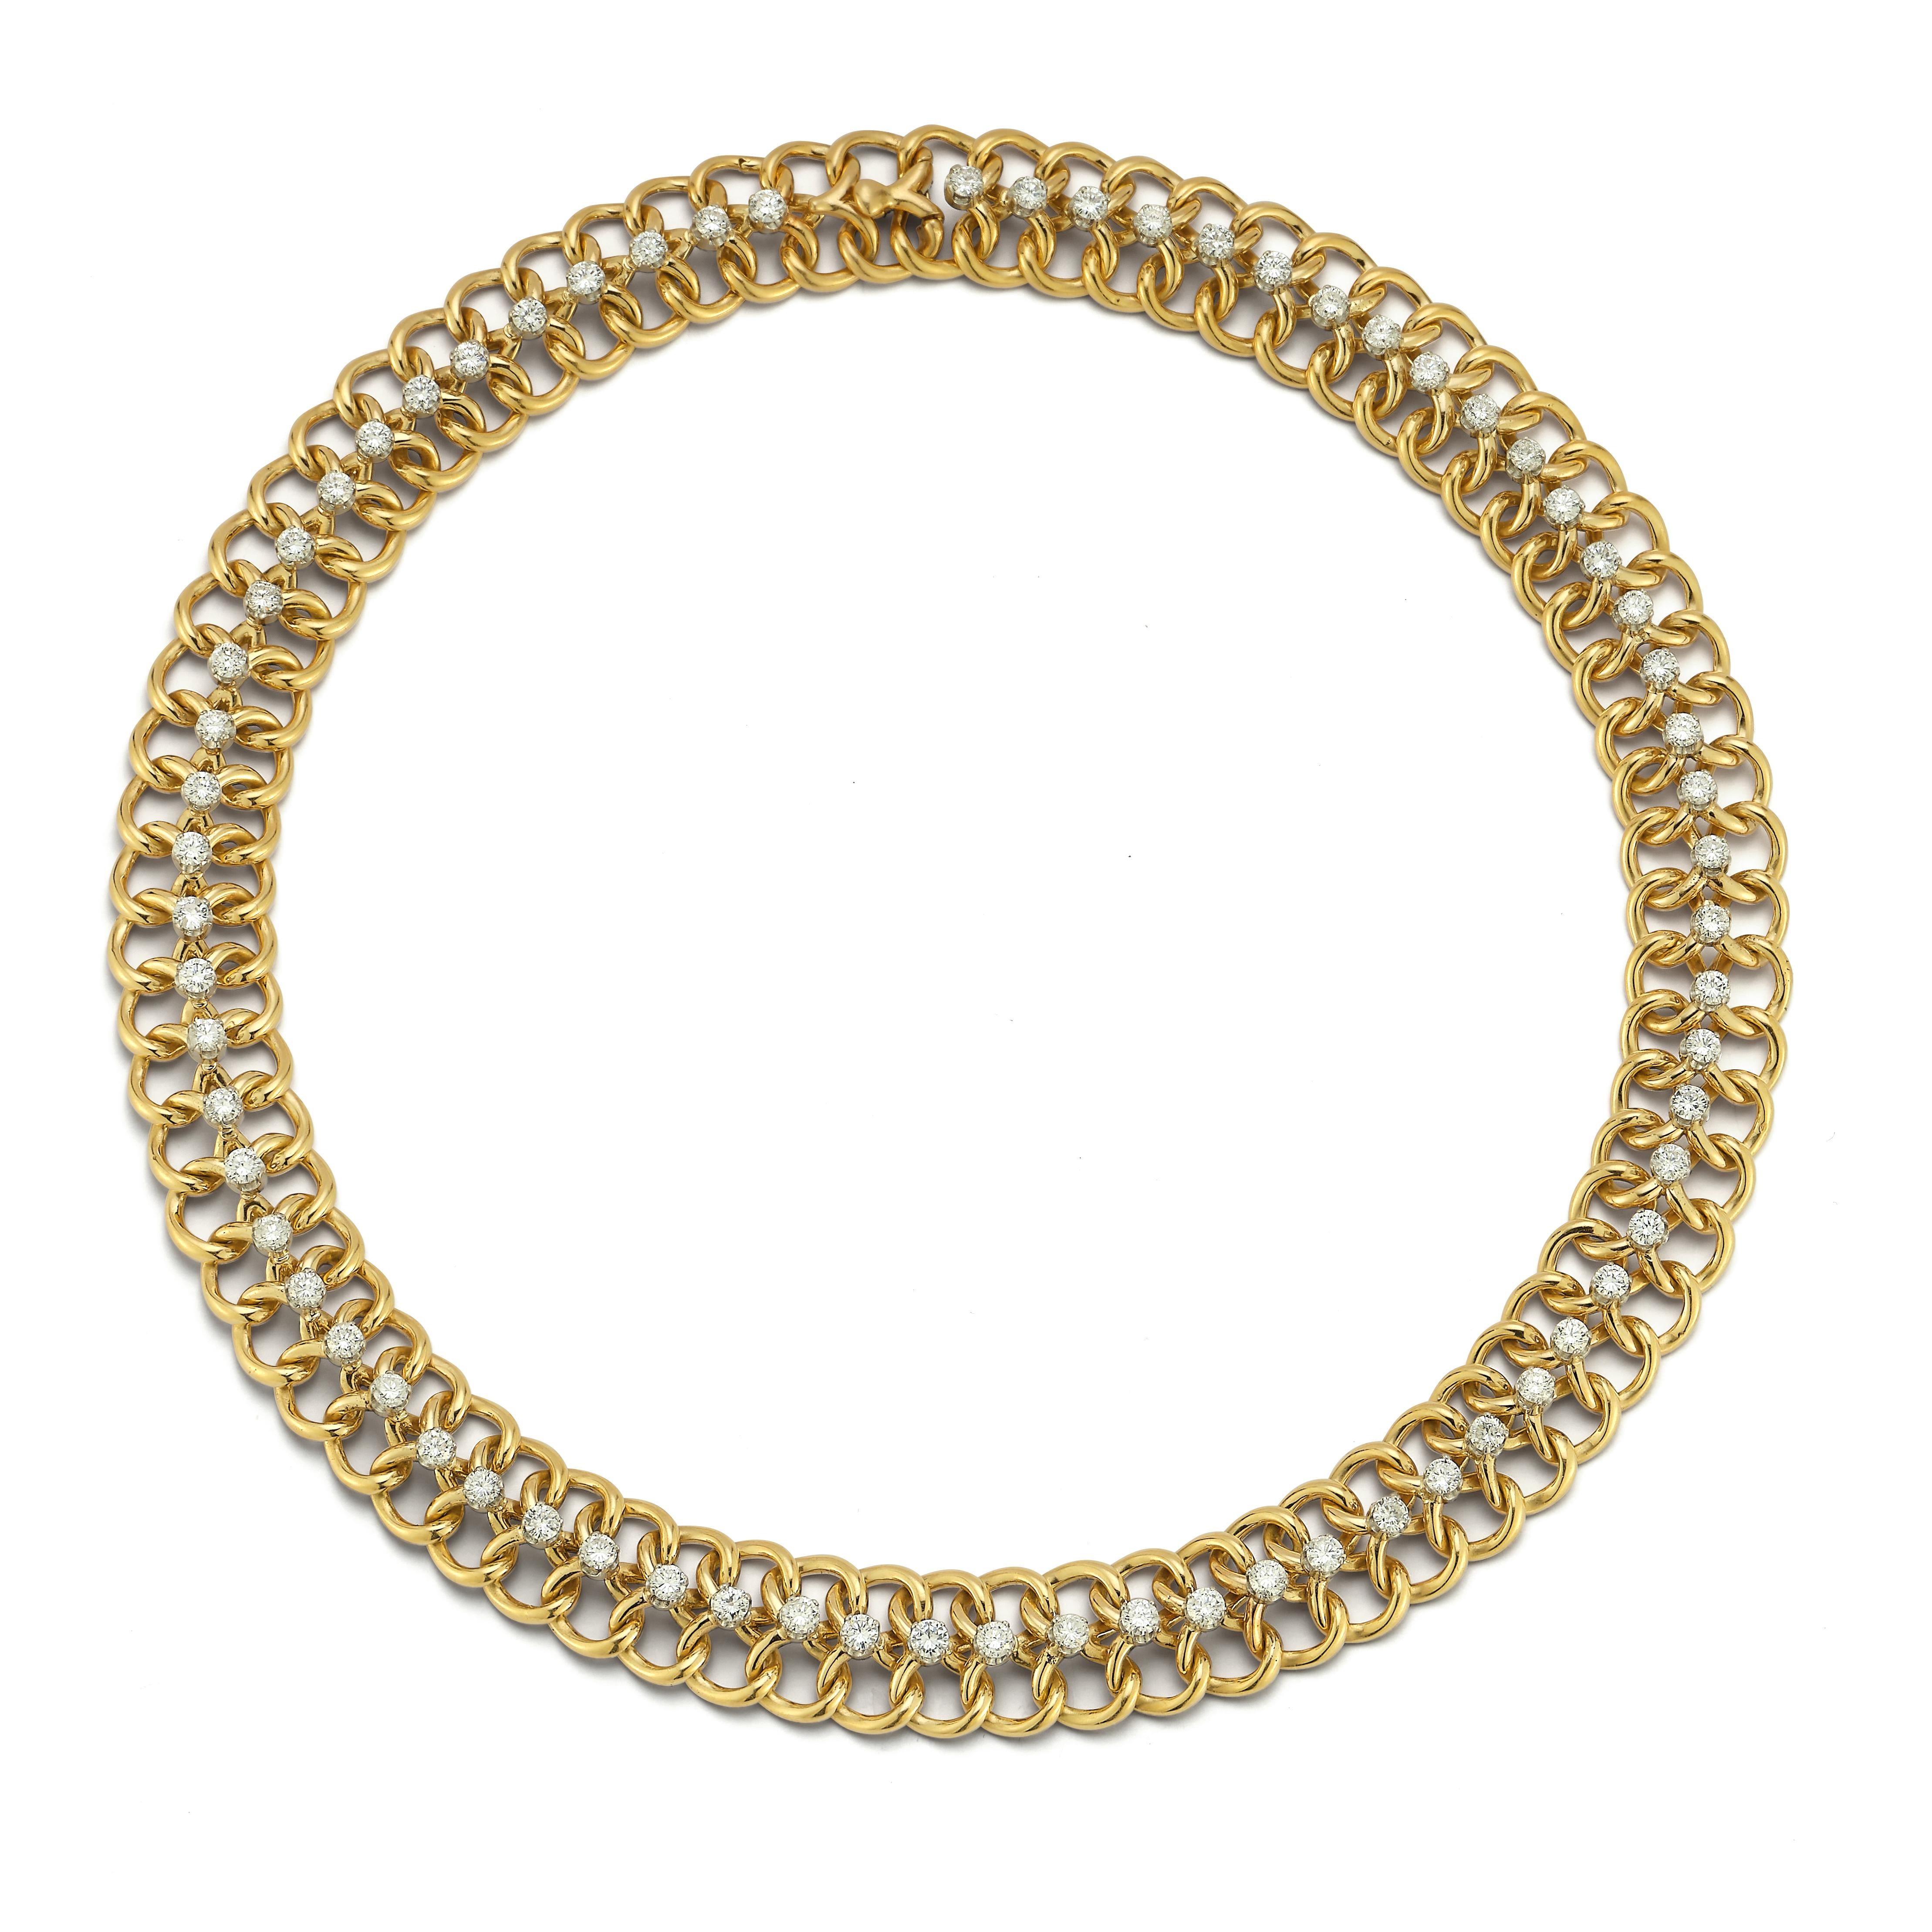 Van Cleef & Arpels Articulate Gold and Diamond Necklace

An 18 karat gold necklace set with 69 round cut diamonds

Signed Van Cleef & Arpels NY and numbered

Approximate Total Diamond Weight: 6.6 carats

Length: 16